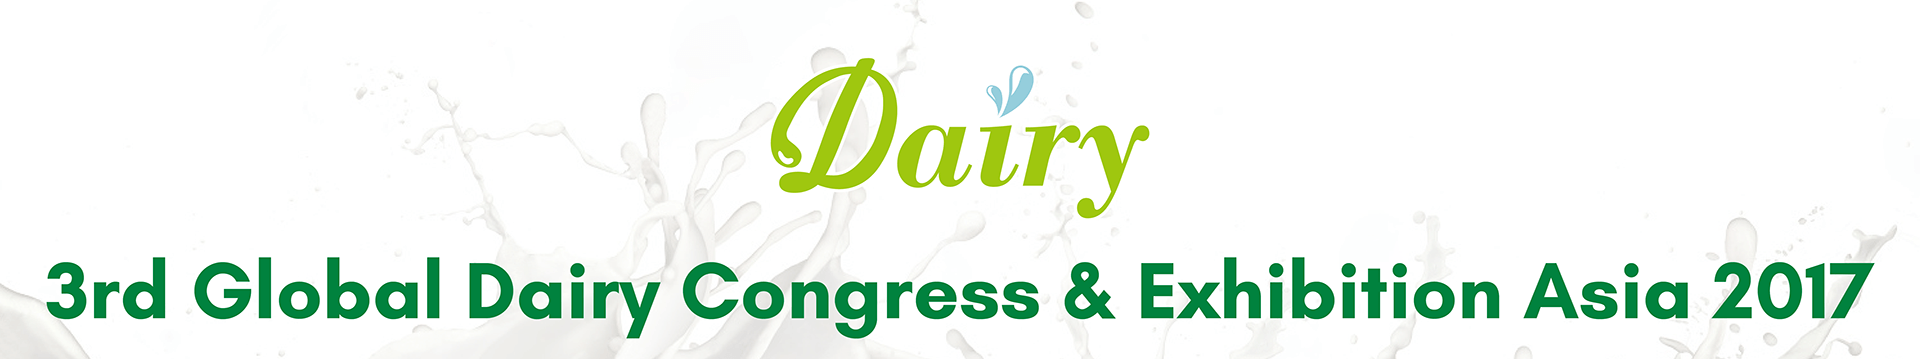 3rd Global Dairy Congress&Exhibition Asia 2017